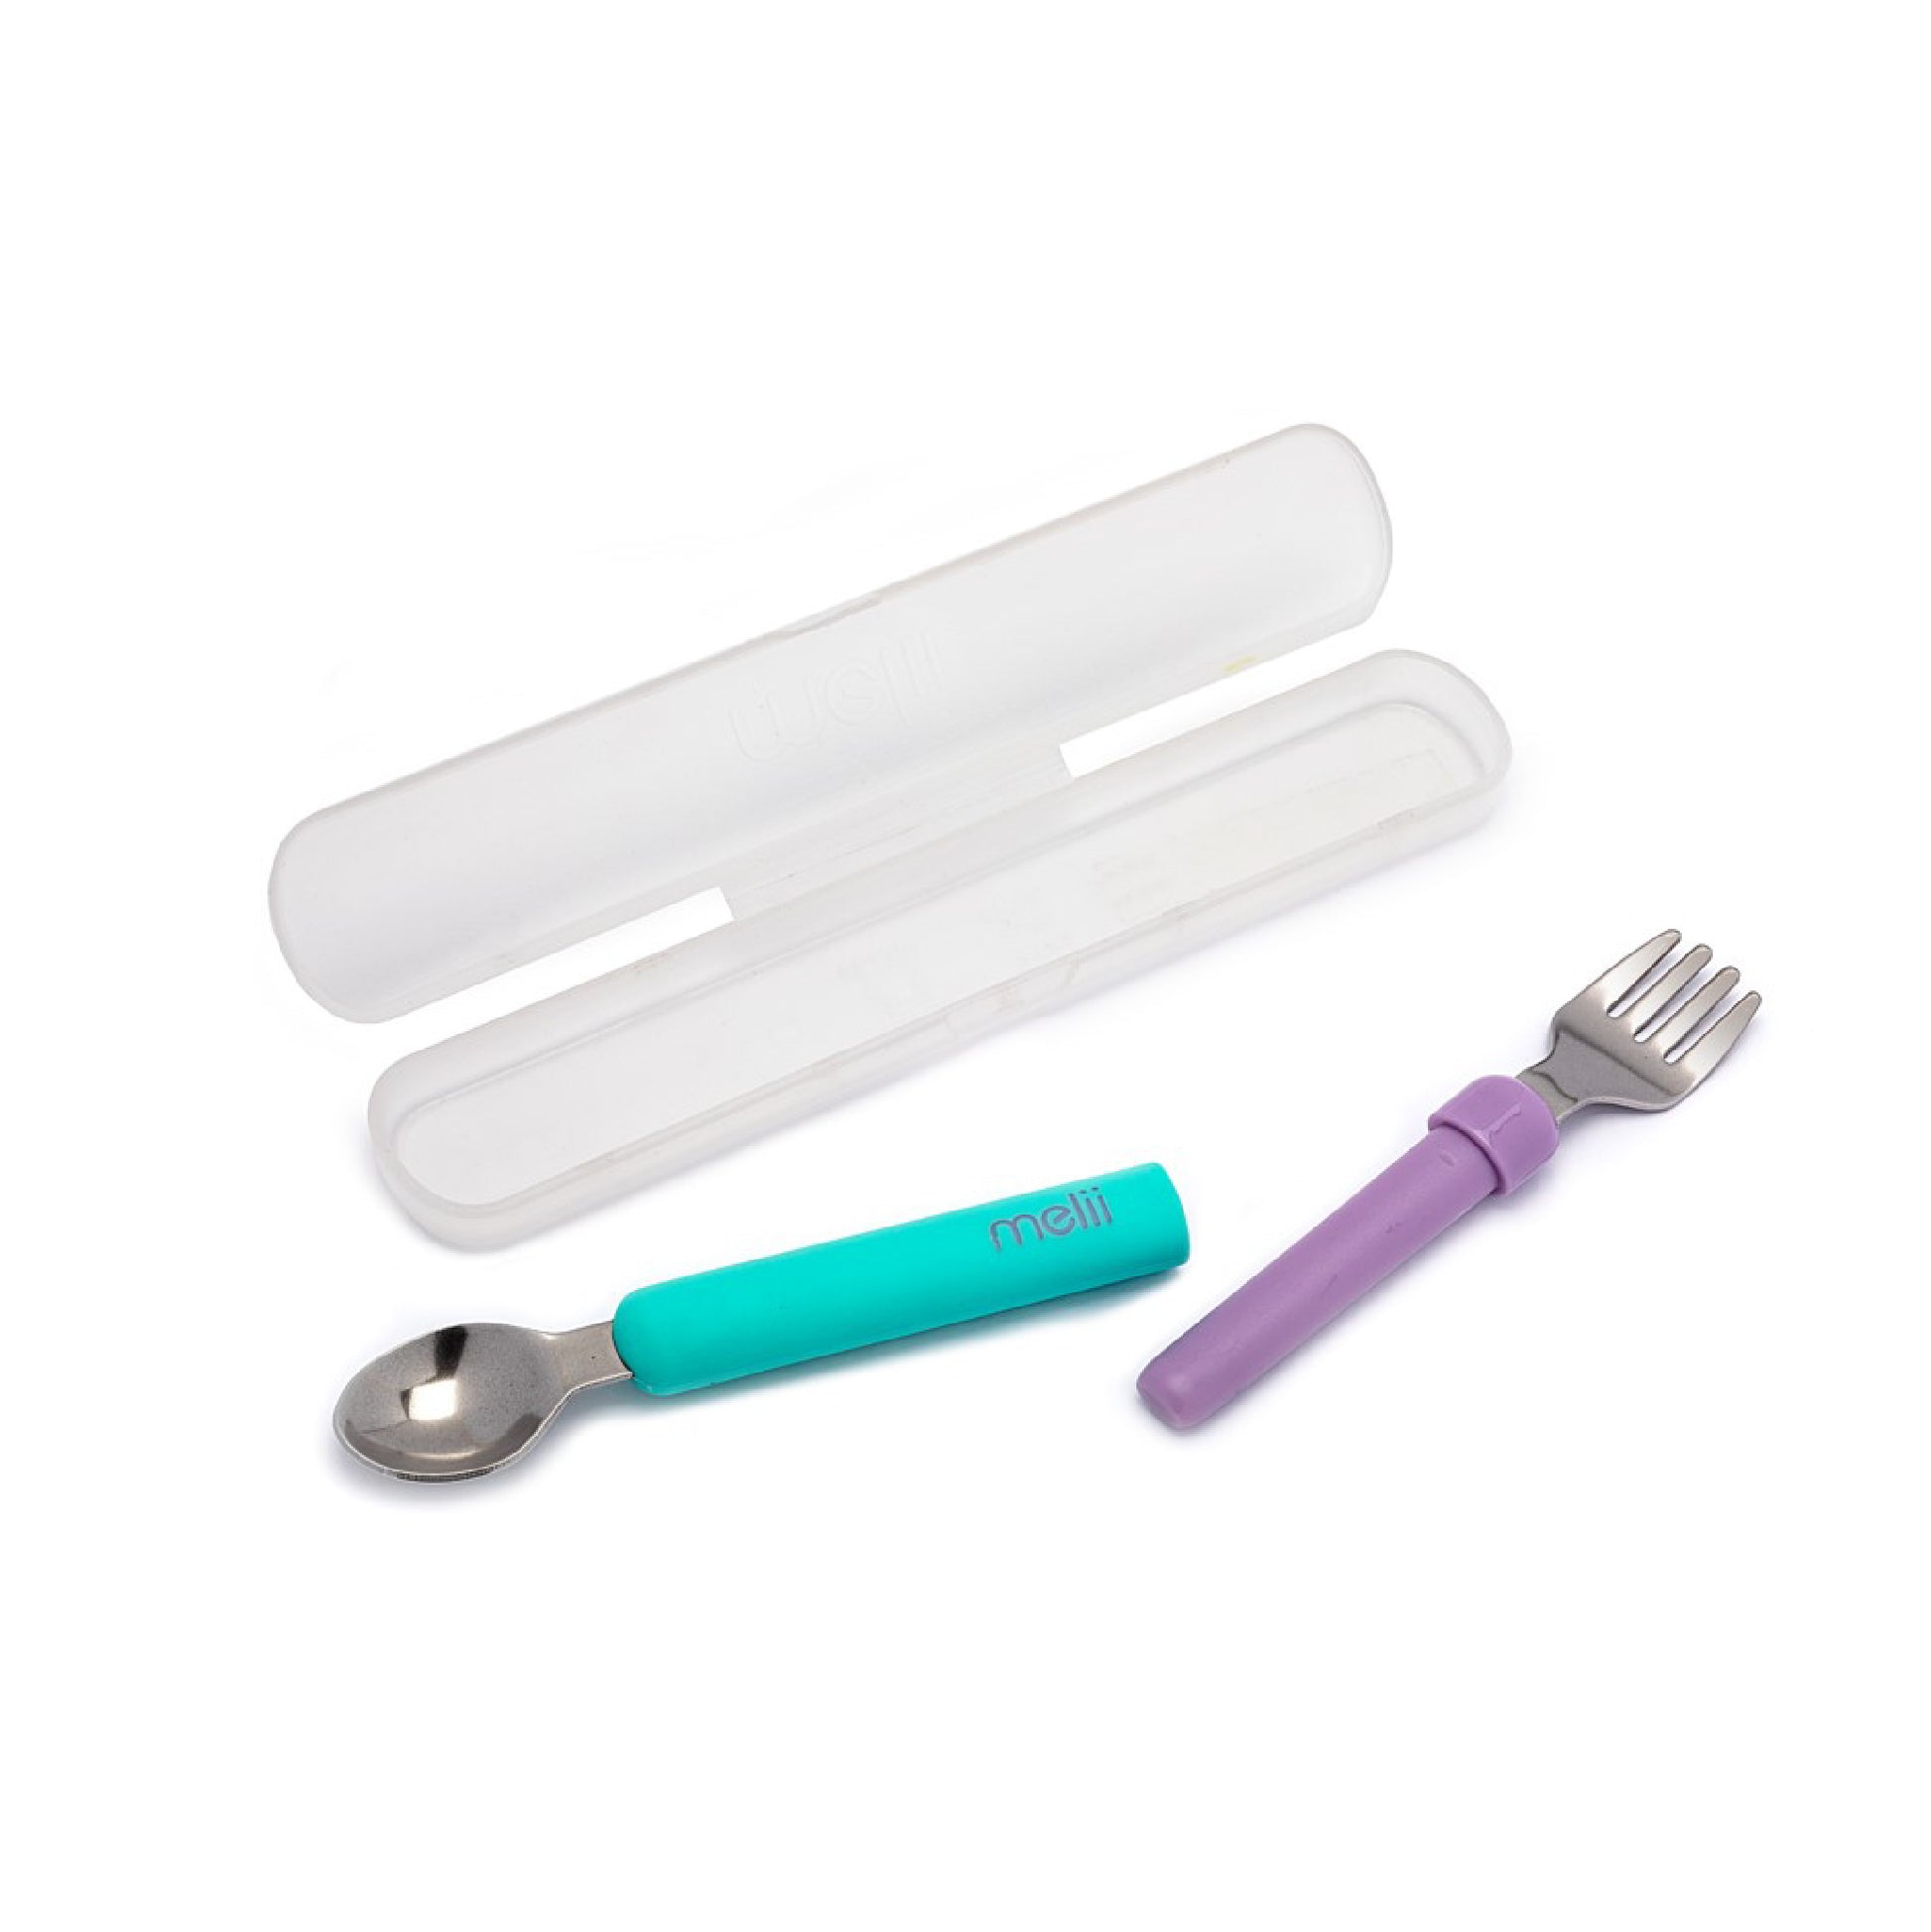 Melii Detachable Spoon & Fork Combo - Portable Baby and Toddler Travel Utensils Set for Mess-Free On-the-Go Feeding